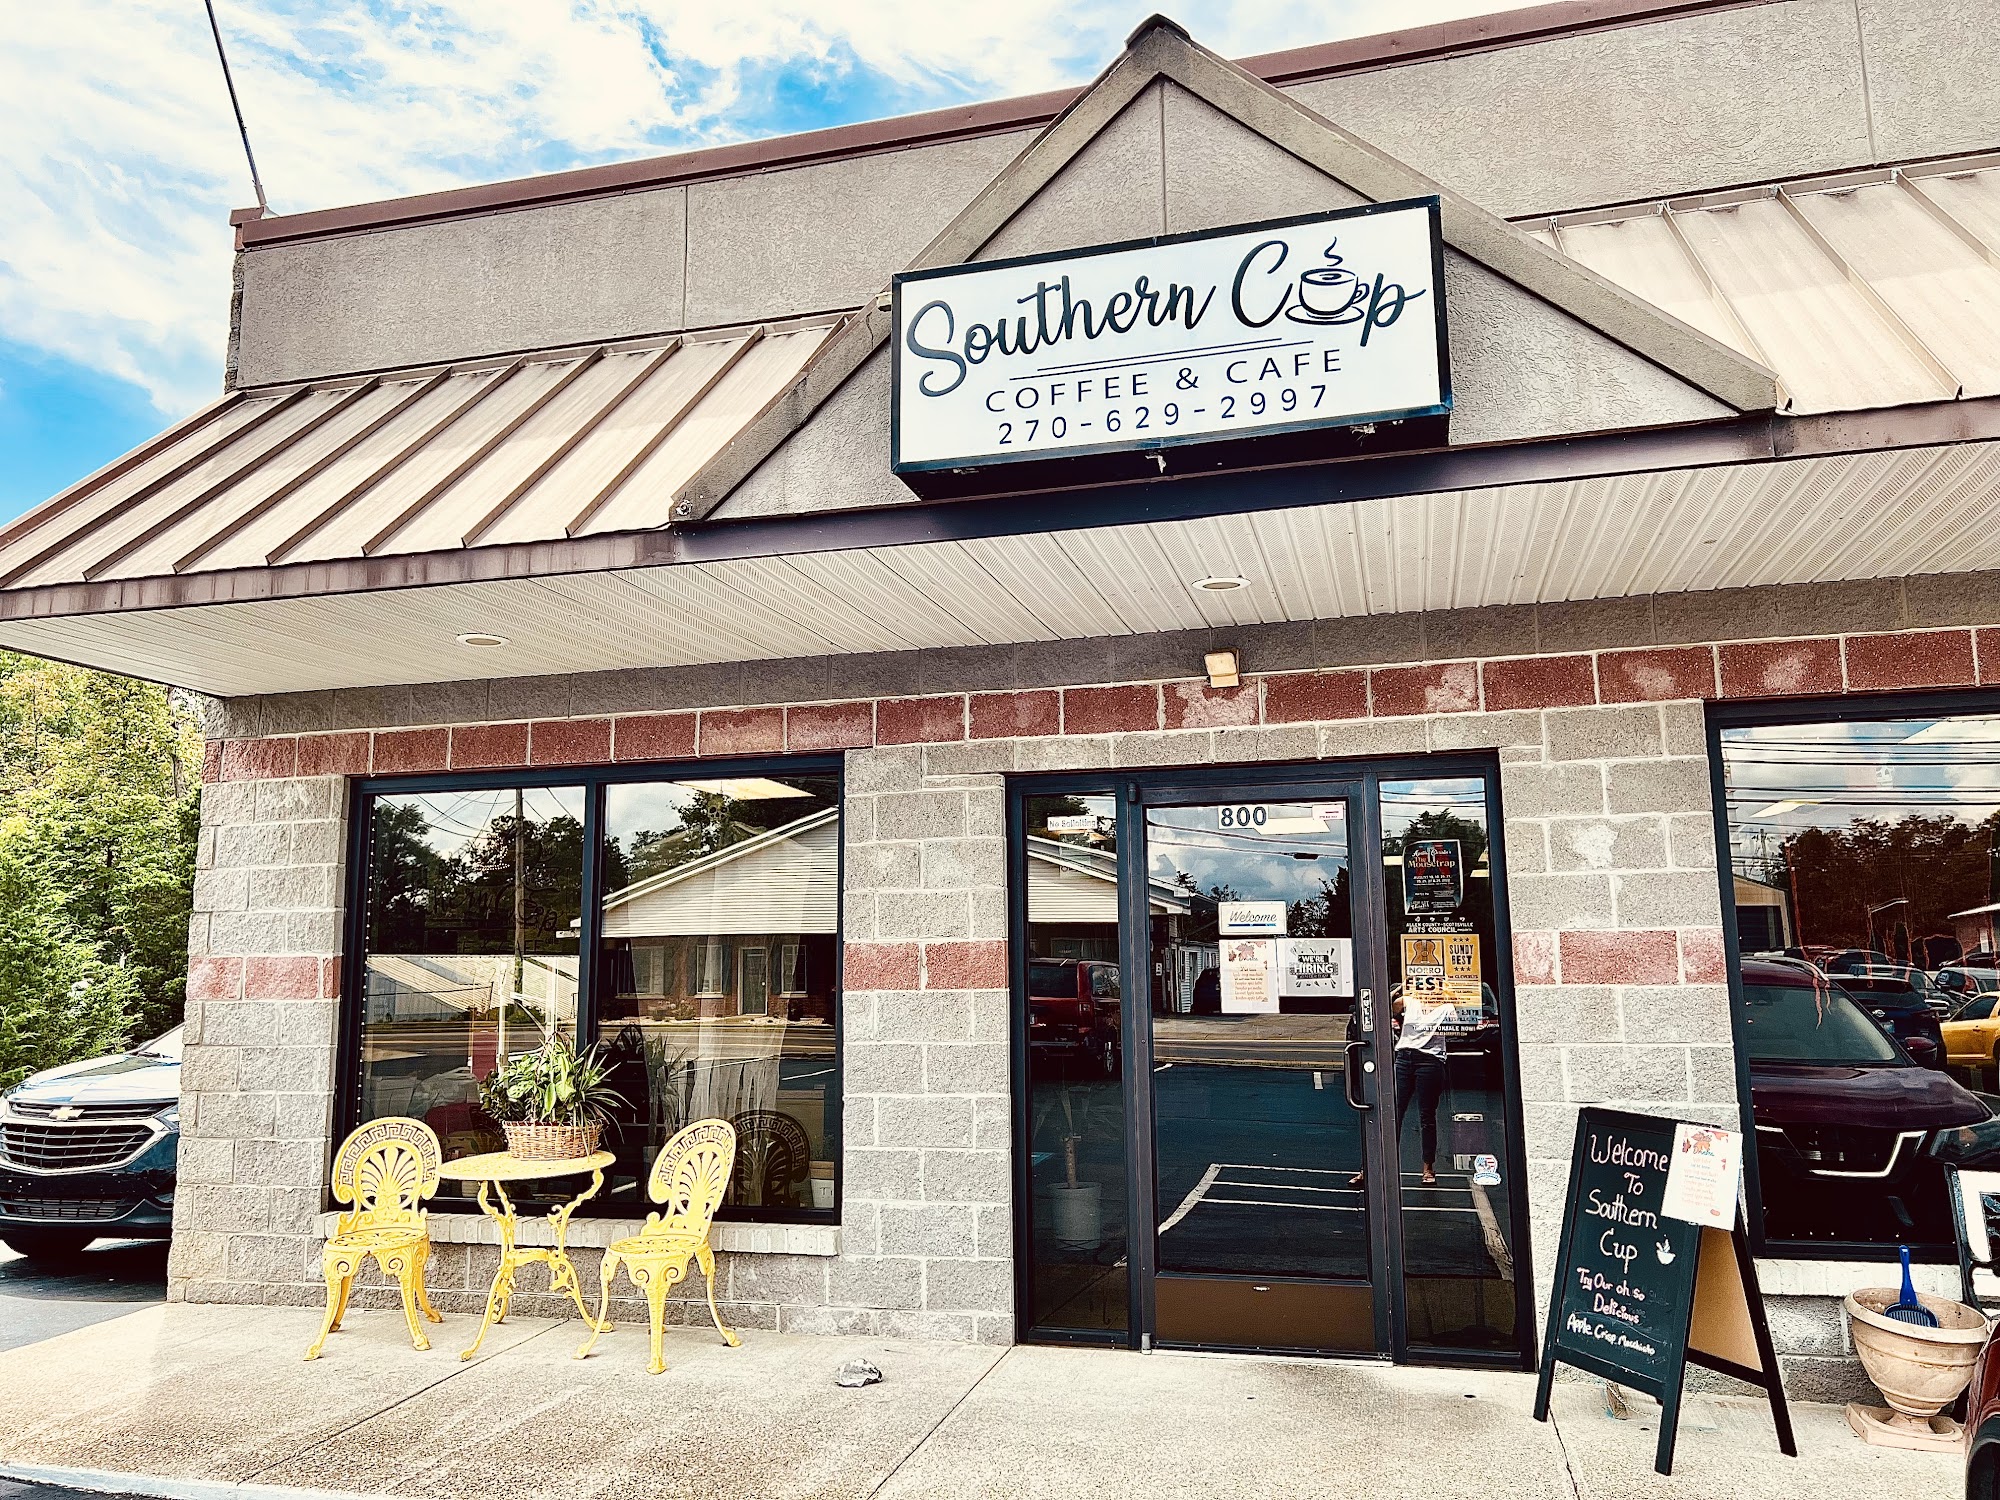 Southern Cup Coffee & Cafe